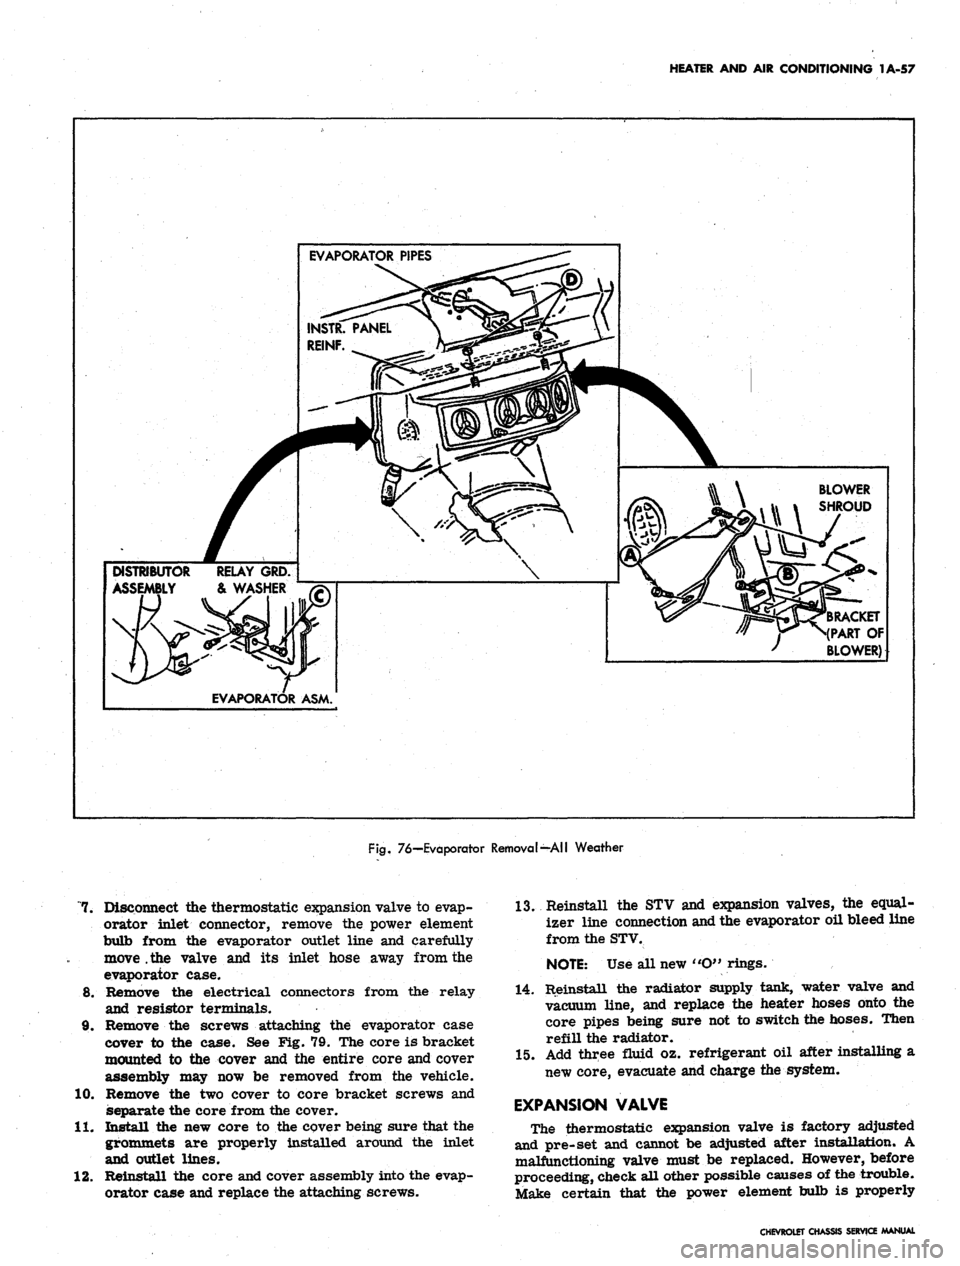 CHEVROLET CAMARO 1967 1.G Chassis Workshop Manual 
HEATER AND AIR CONDITIONING 1A-57

EVAPORATOR PIPES

DISTRIBUTOR RELAY GRD.

ASSEMBLY & WASHER

EVAPORATOR ASM. 
BLOWER

SHROUD

(RACKET

(PART OF

BLOWER)

Fig.
 76—Evaporator Removal—All Weathe